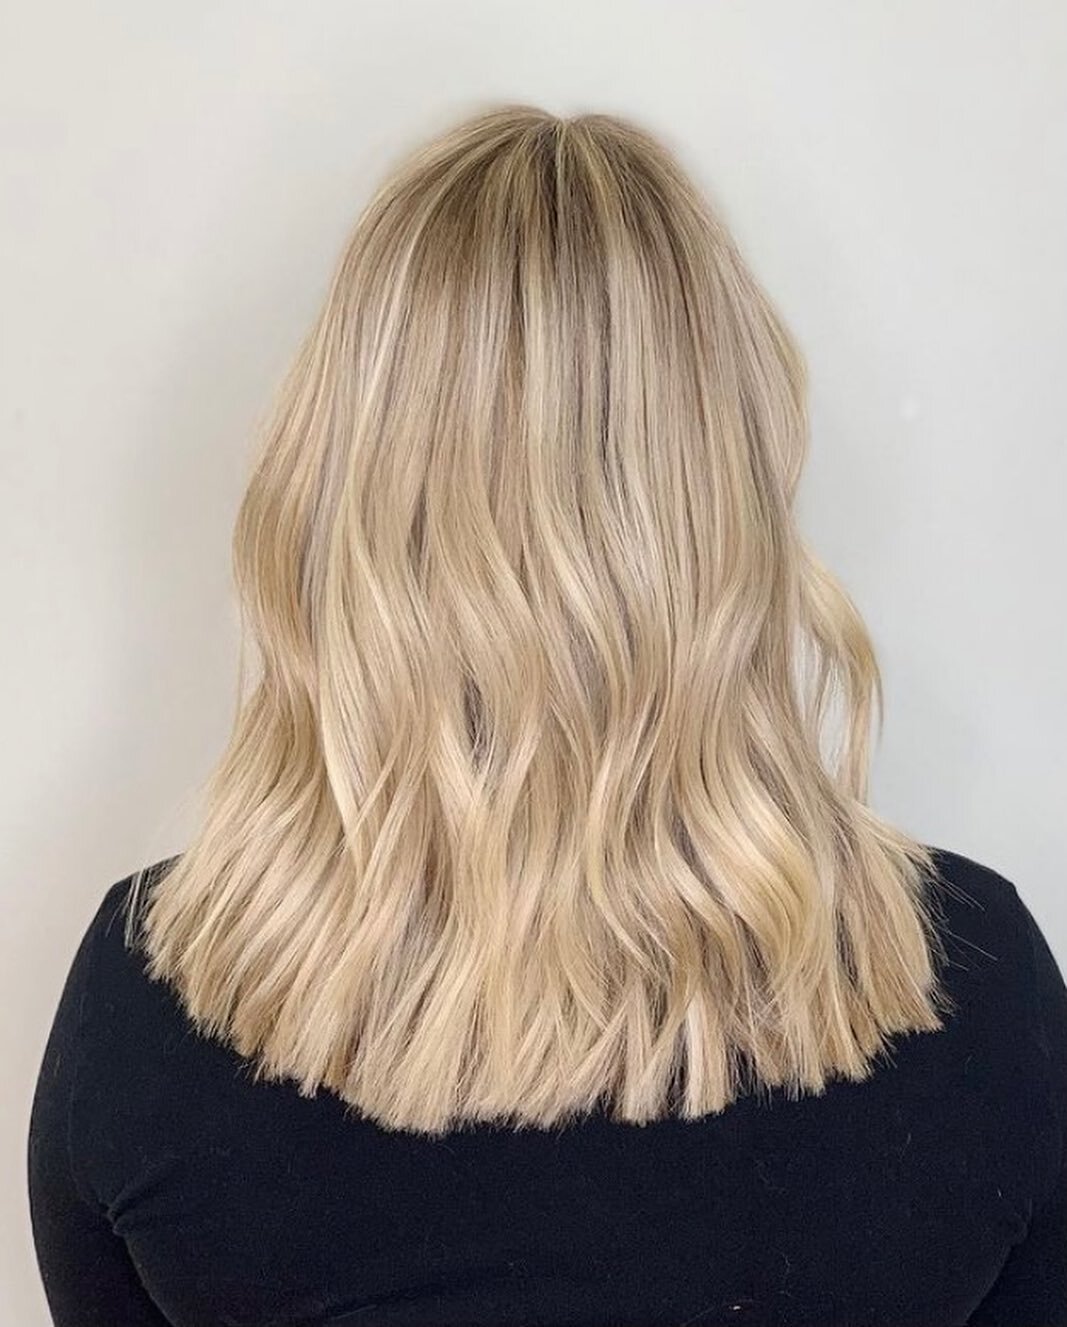 Hit that save button!! Then schedule your next color appointment!!
Hair by DeeDee ( @theblondebuzzz )
#balayage #balayagehair #haircolor #aniusalon #madisonwisconsin #wisconsinsalon #madisonsalon #blondehair #blondebalayage #balyagehighlights #platin